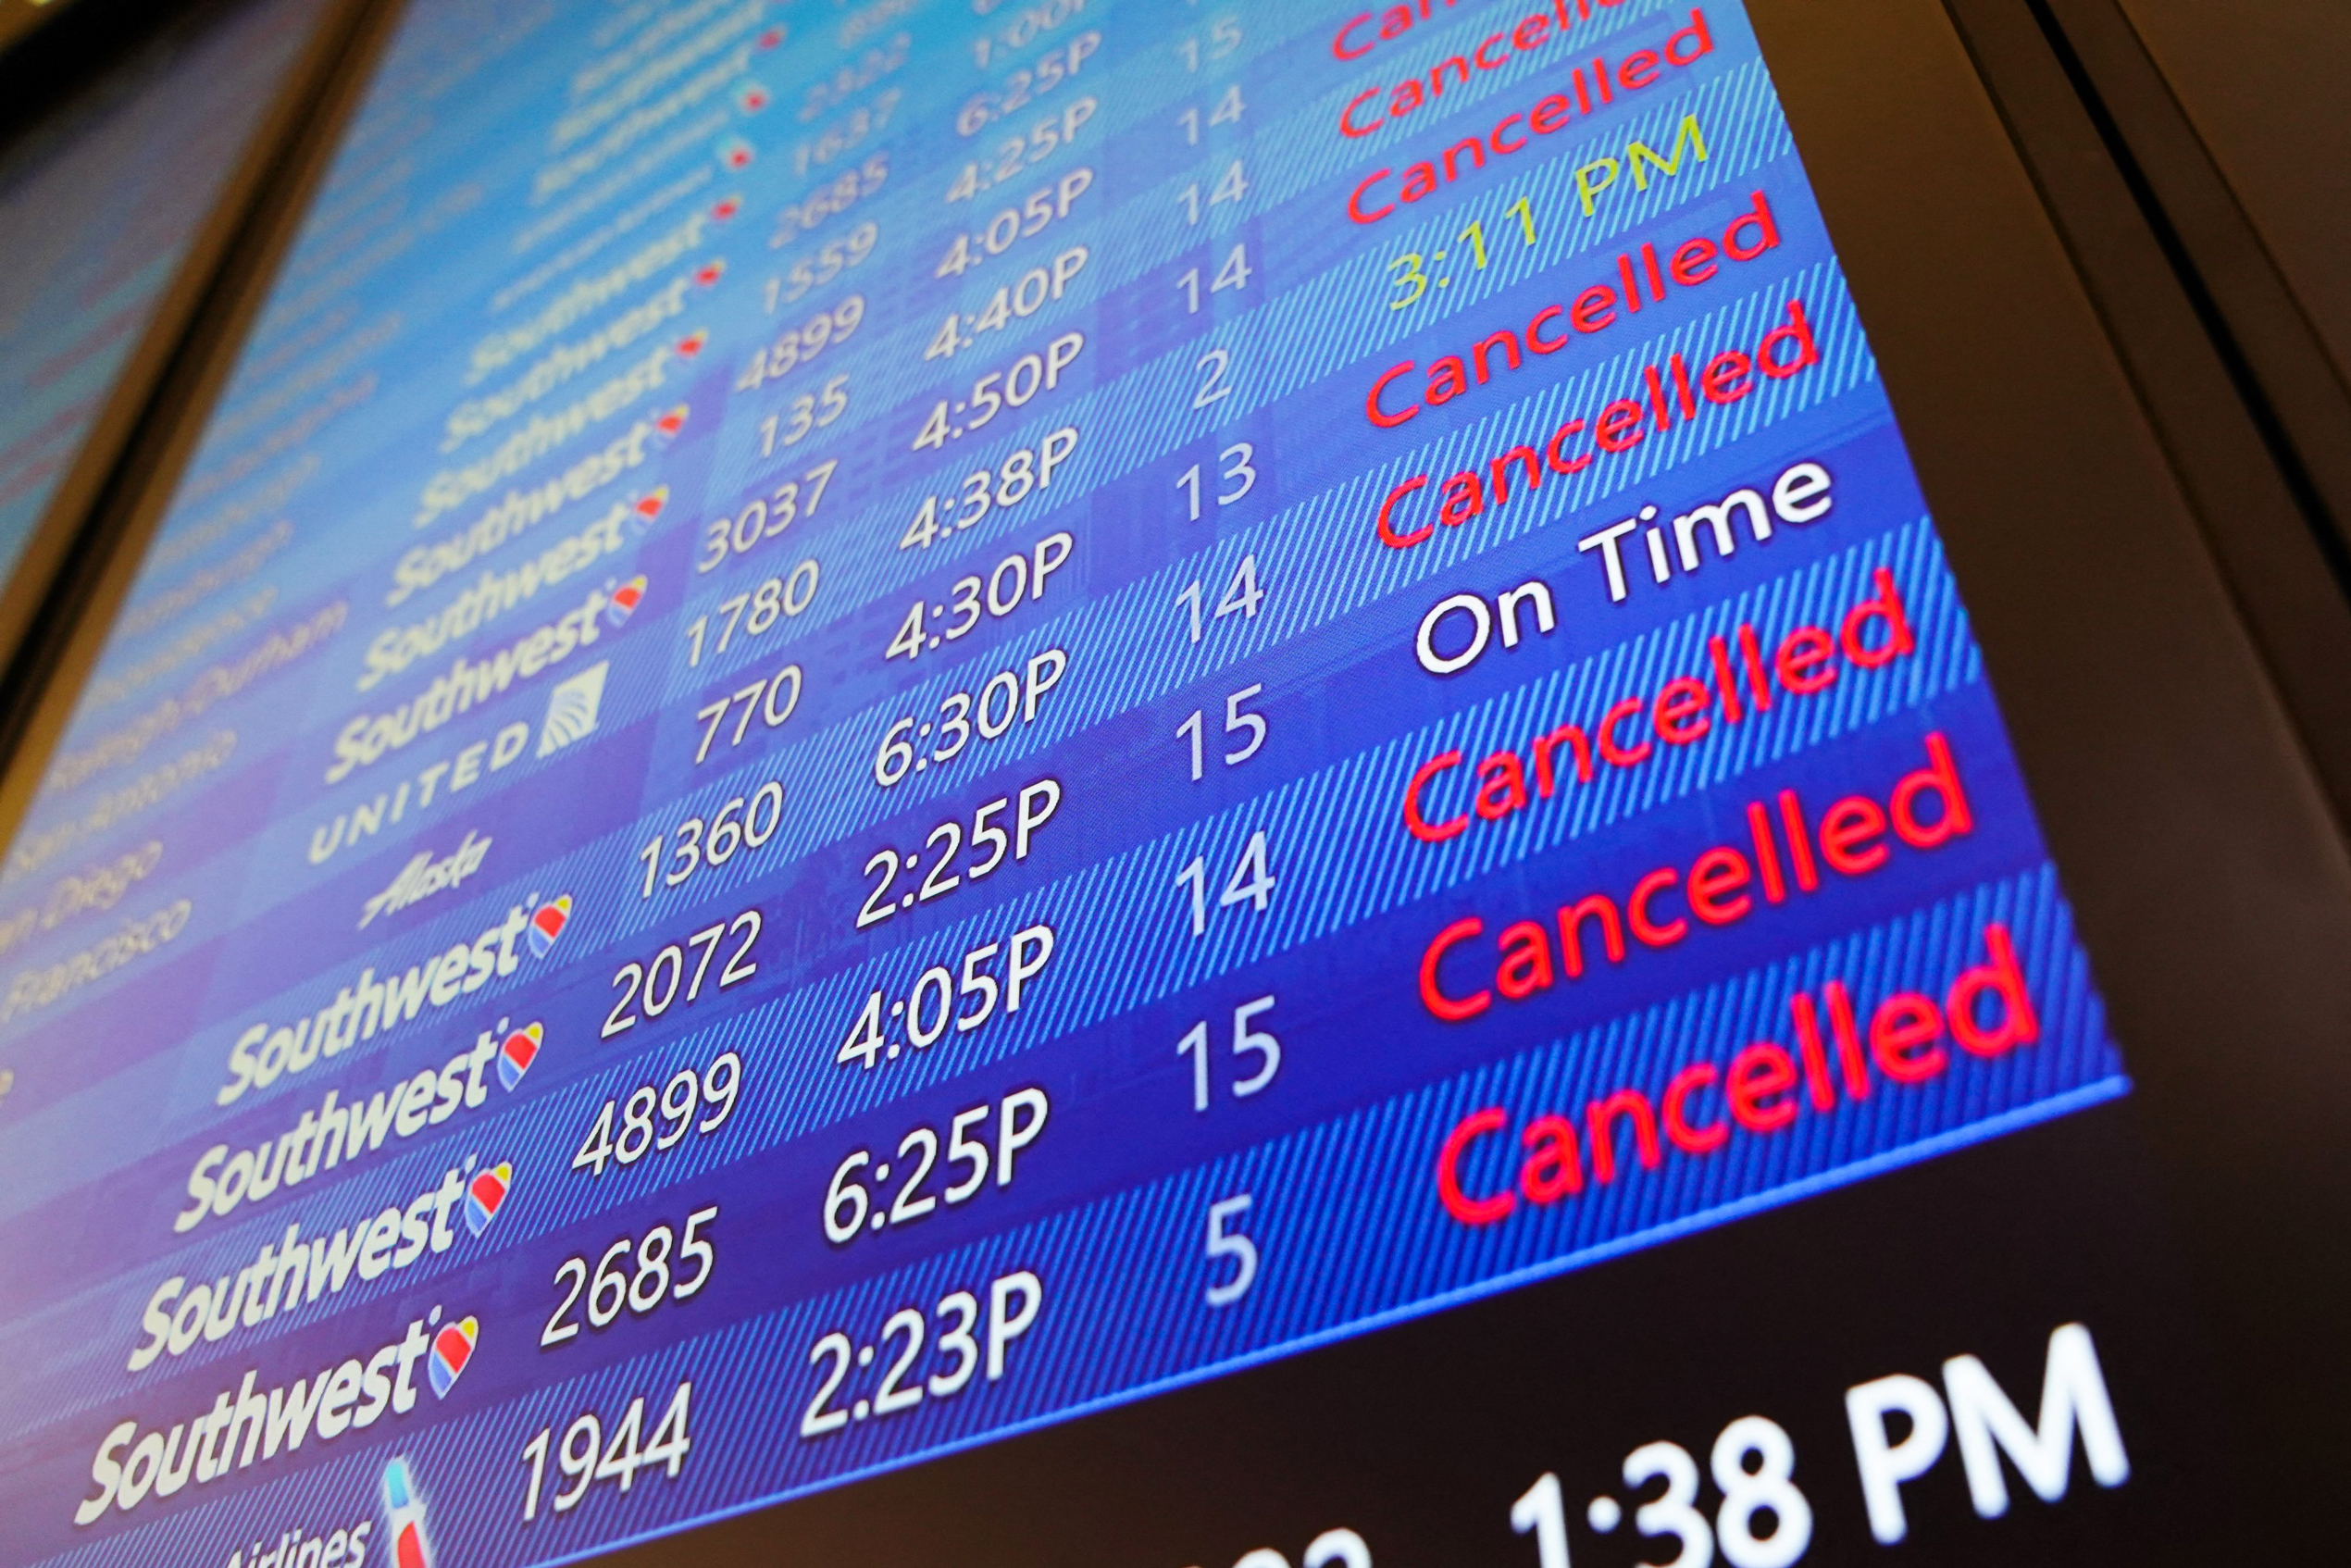 Flights Cancelled As Storm Hits Gulf Coast